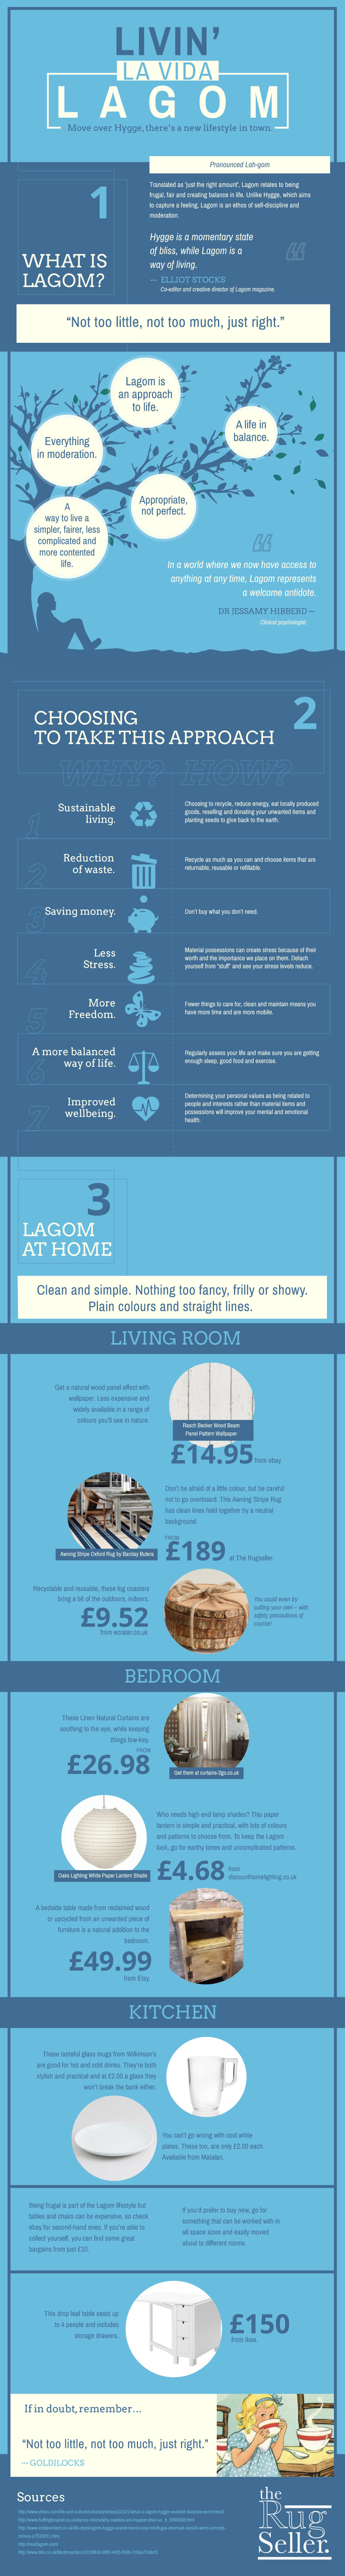 A Guide To Living The Lagom Life - Infographic